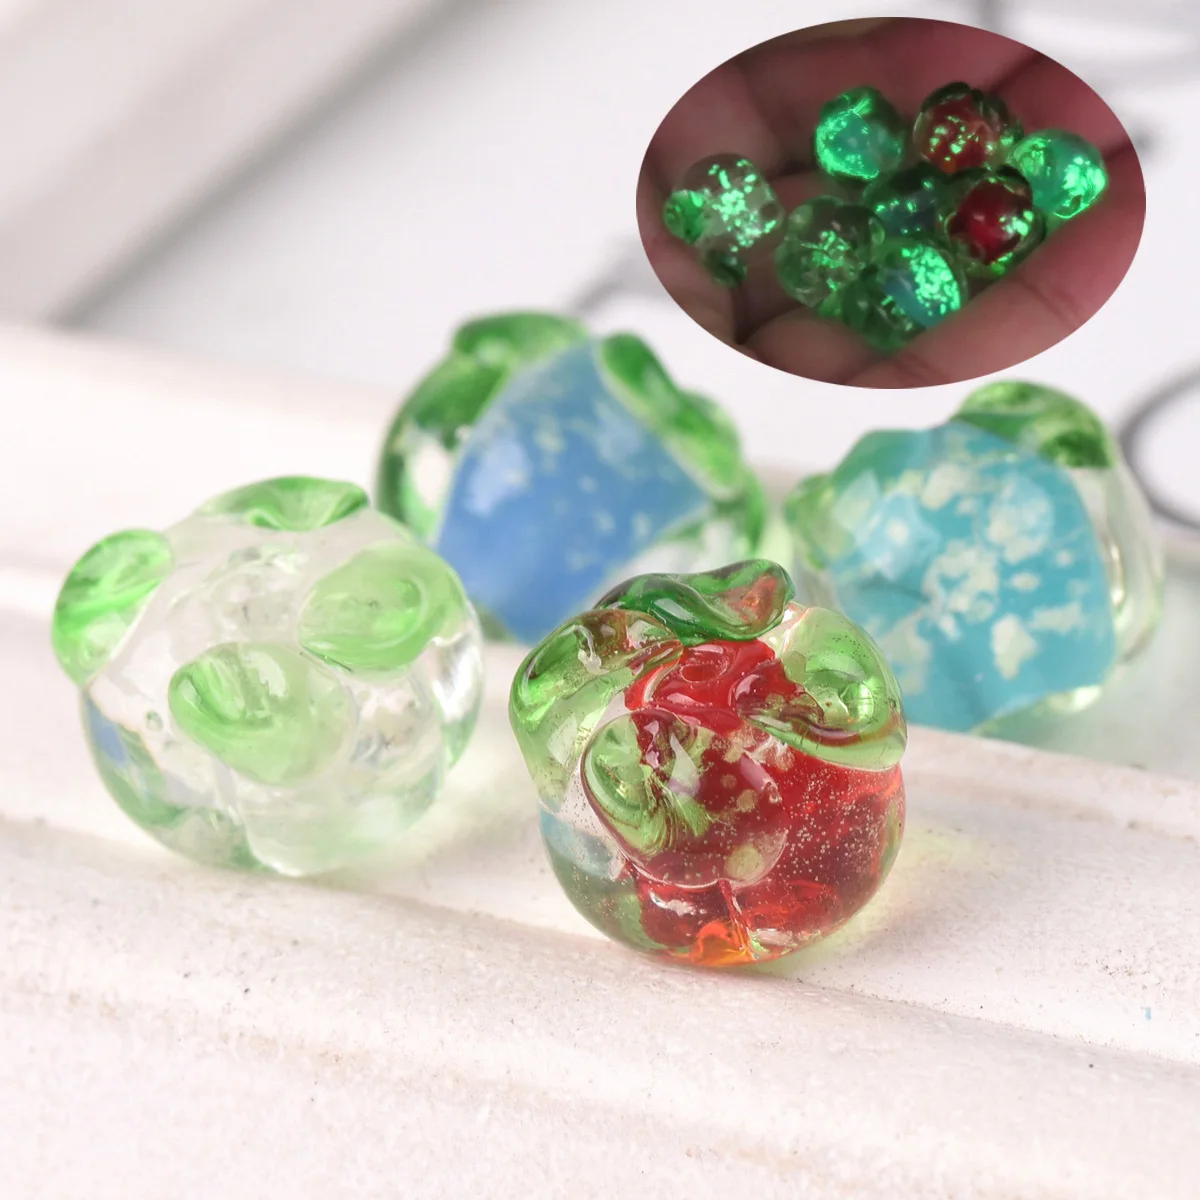 5pcs 12mm Round Luminous Persimmon Shape Handmade Lampwork Glass Loose Beads for Jewelry Making DIY Crafts Findings round shape solid brass material bag feet 12mm round purse feet stud for bag making